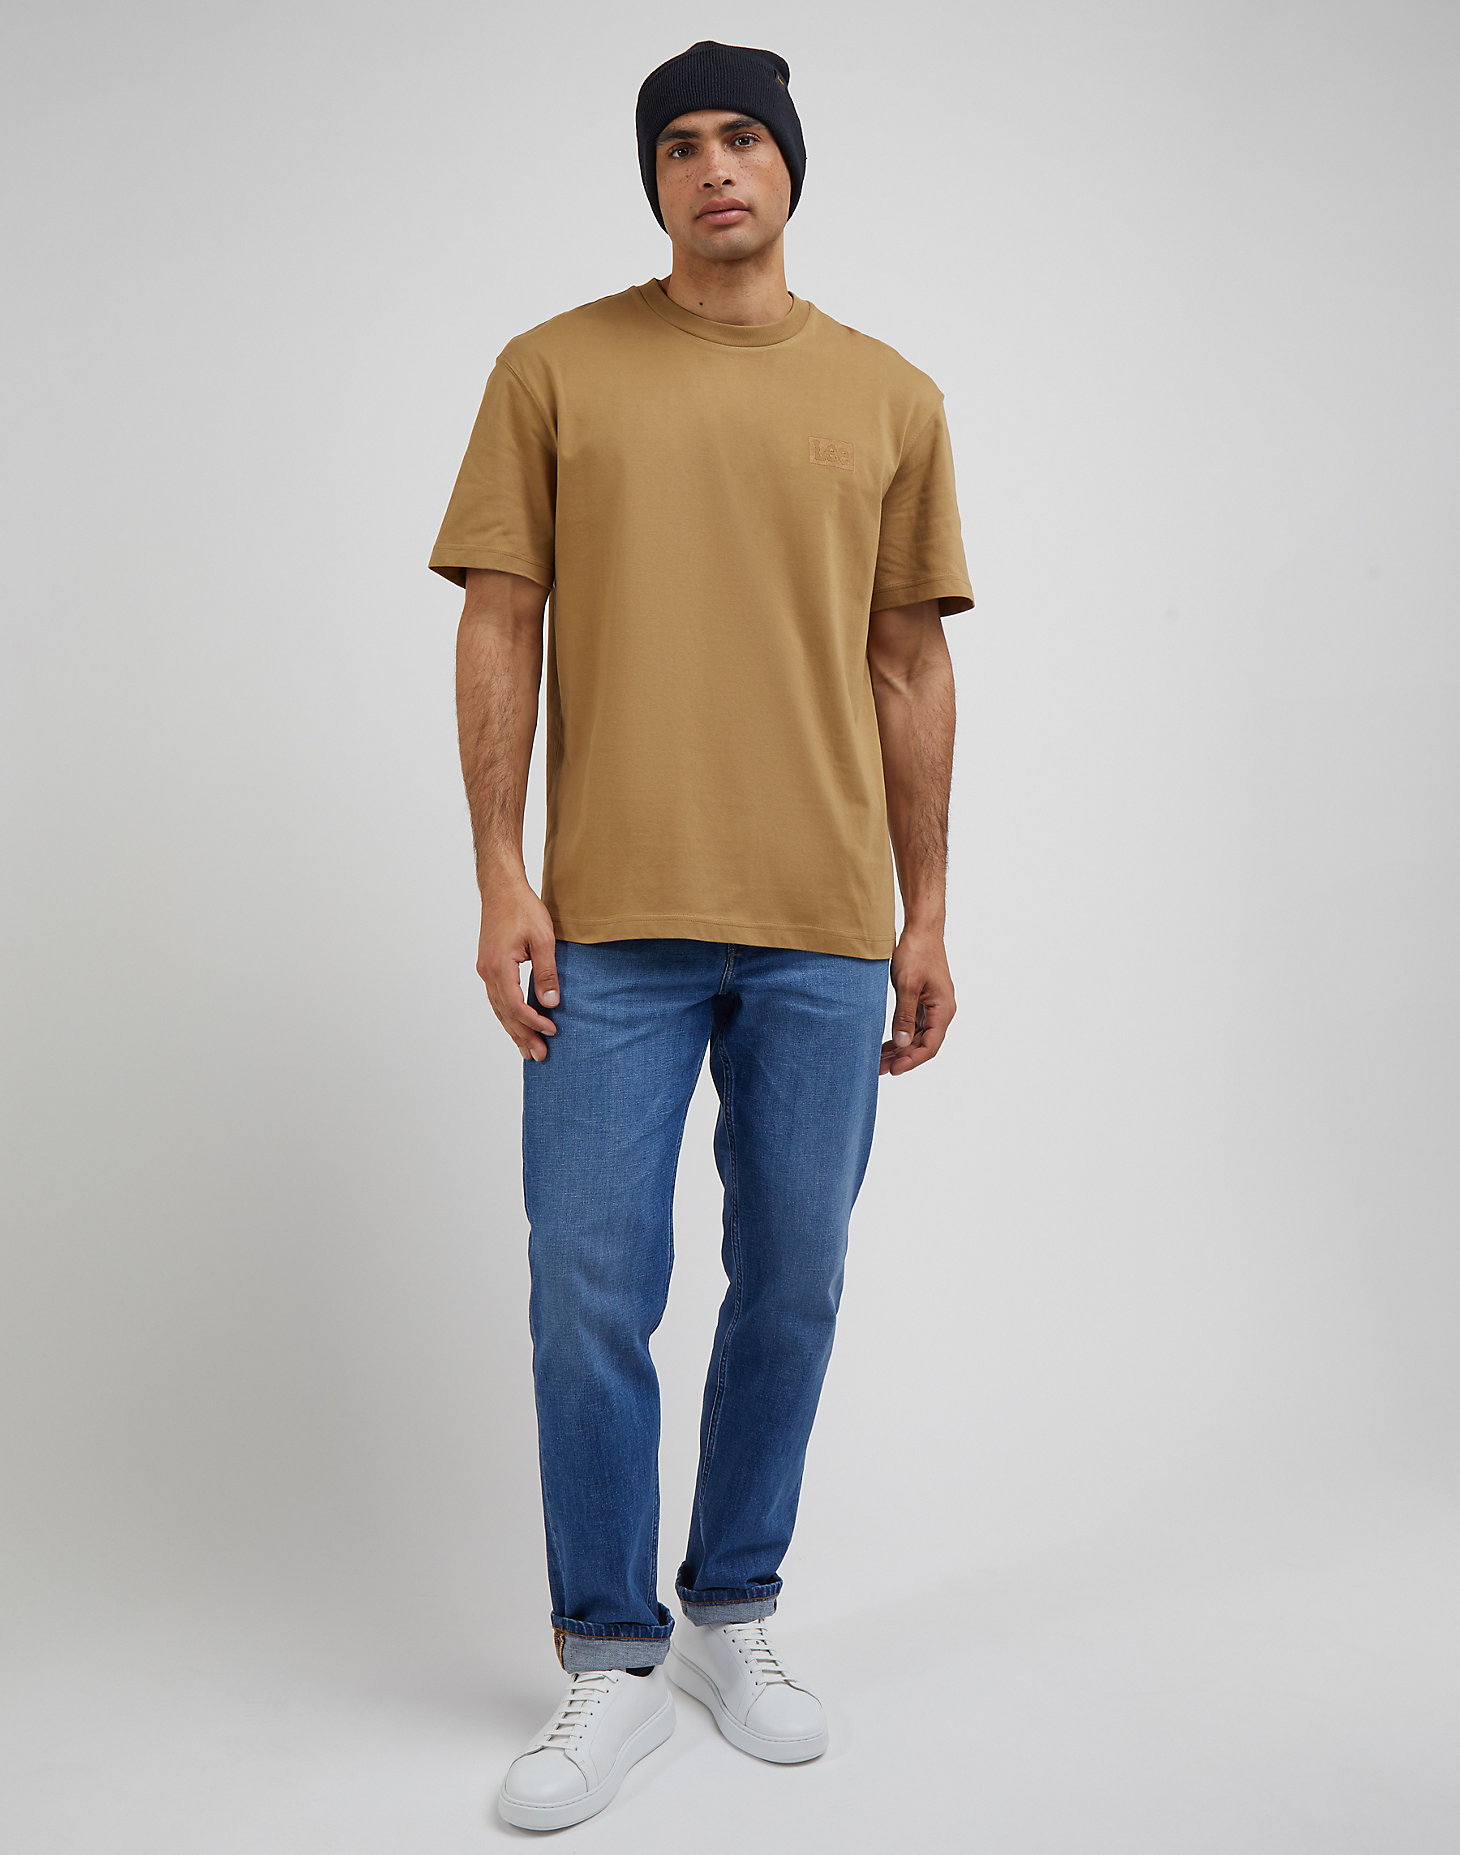 Plain Loose Tee in Clay alternative view 2